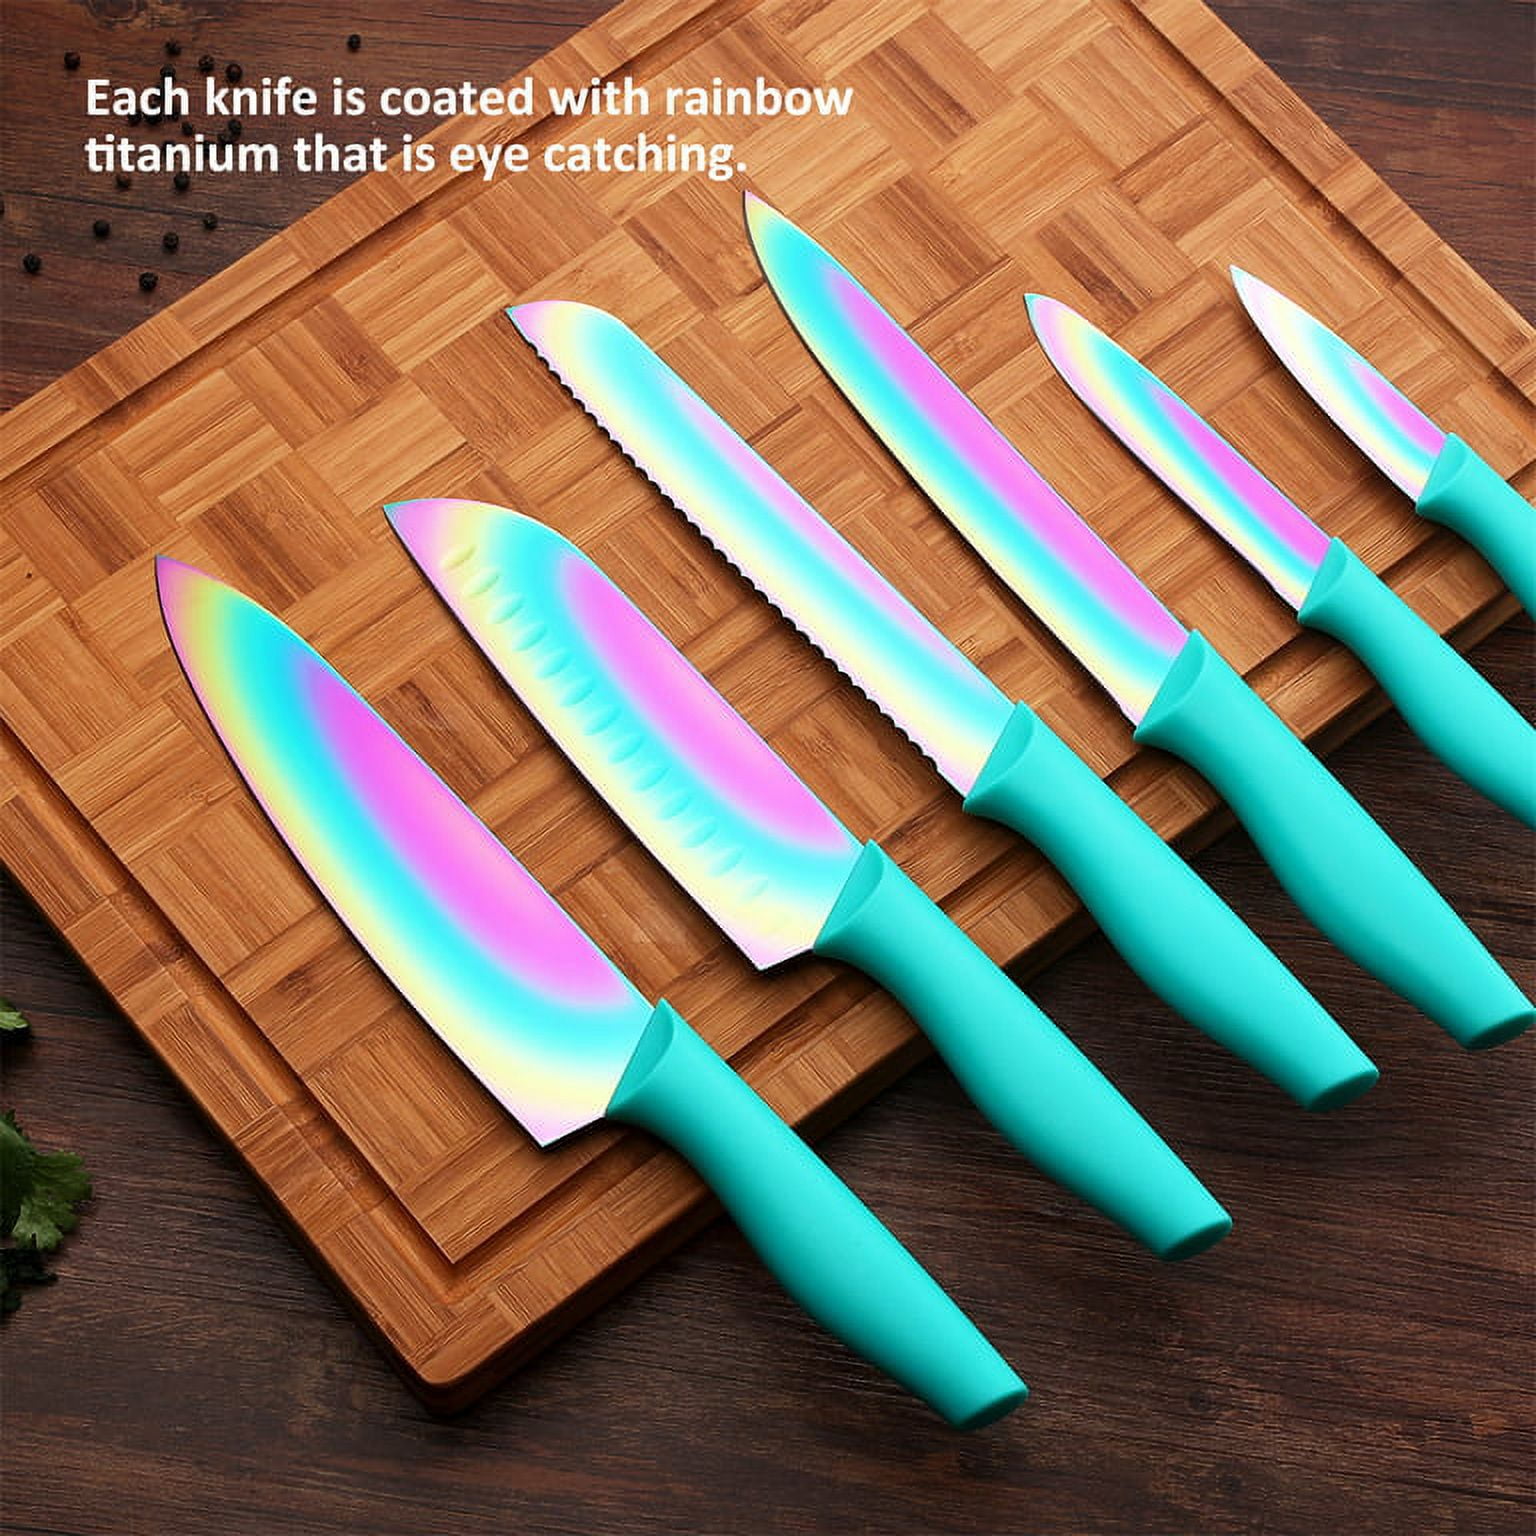 Stainless Steel Kitchen Knives 7 Piece Set Sharp Colorful Blade ABS+TPR  Handle Knife Meat Fish Fruit Chopping Block Accessories